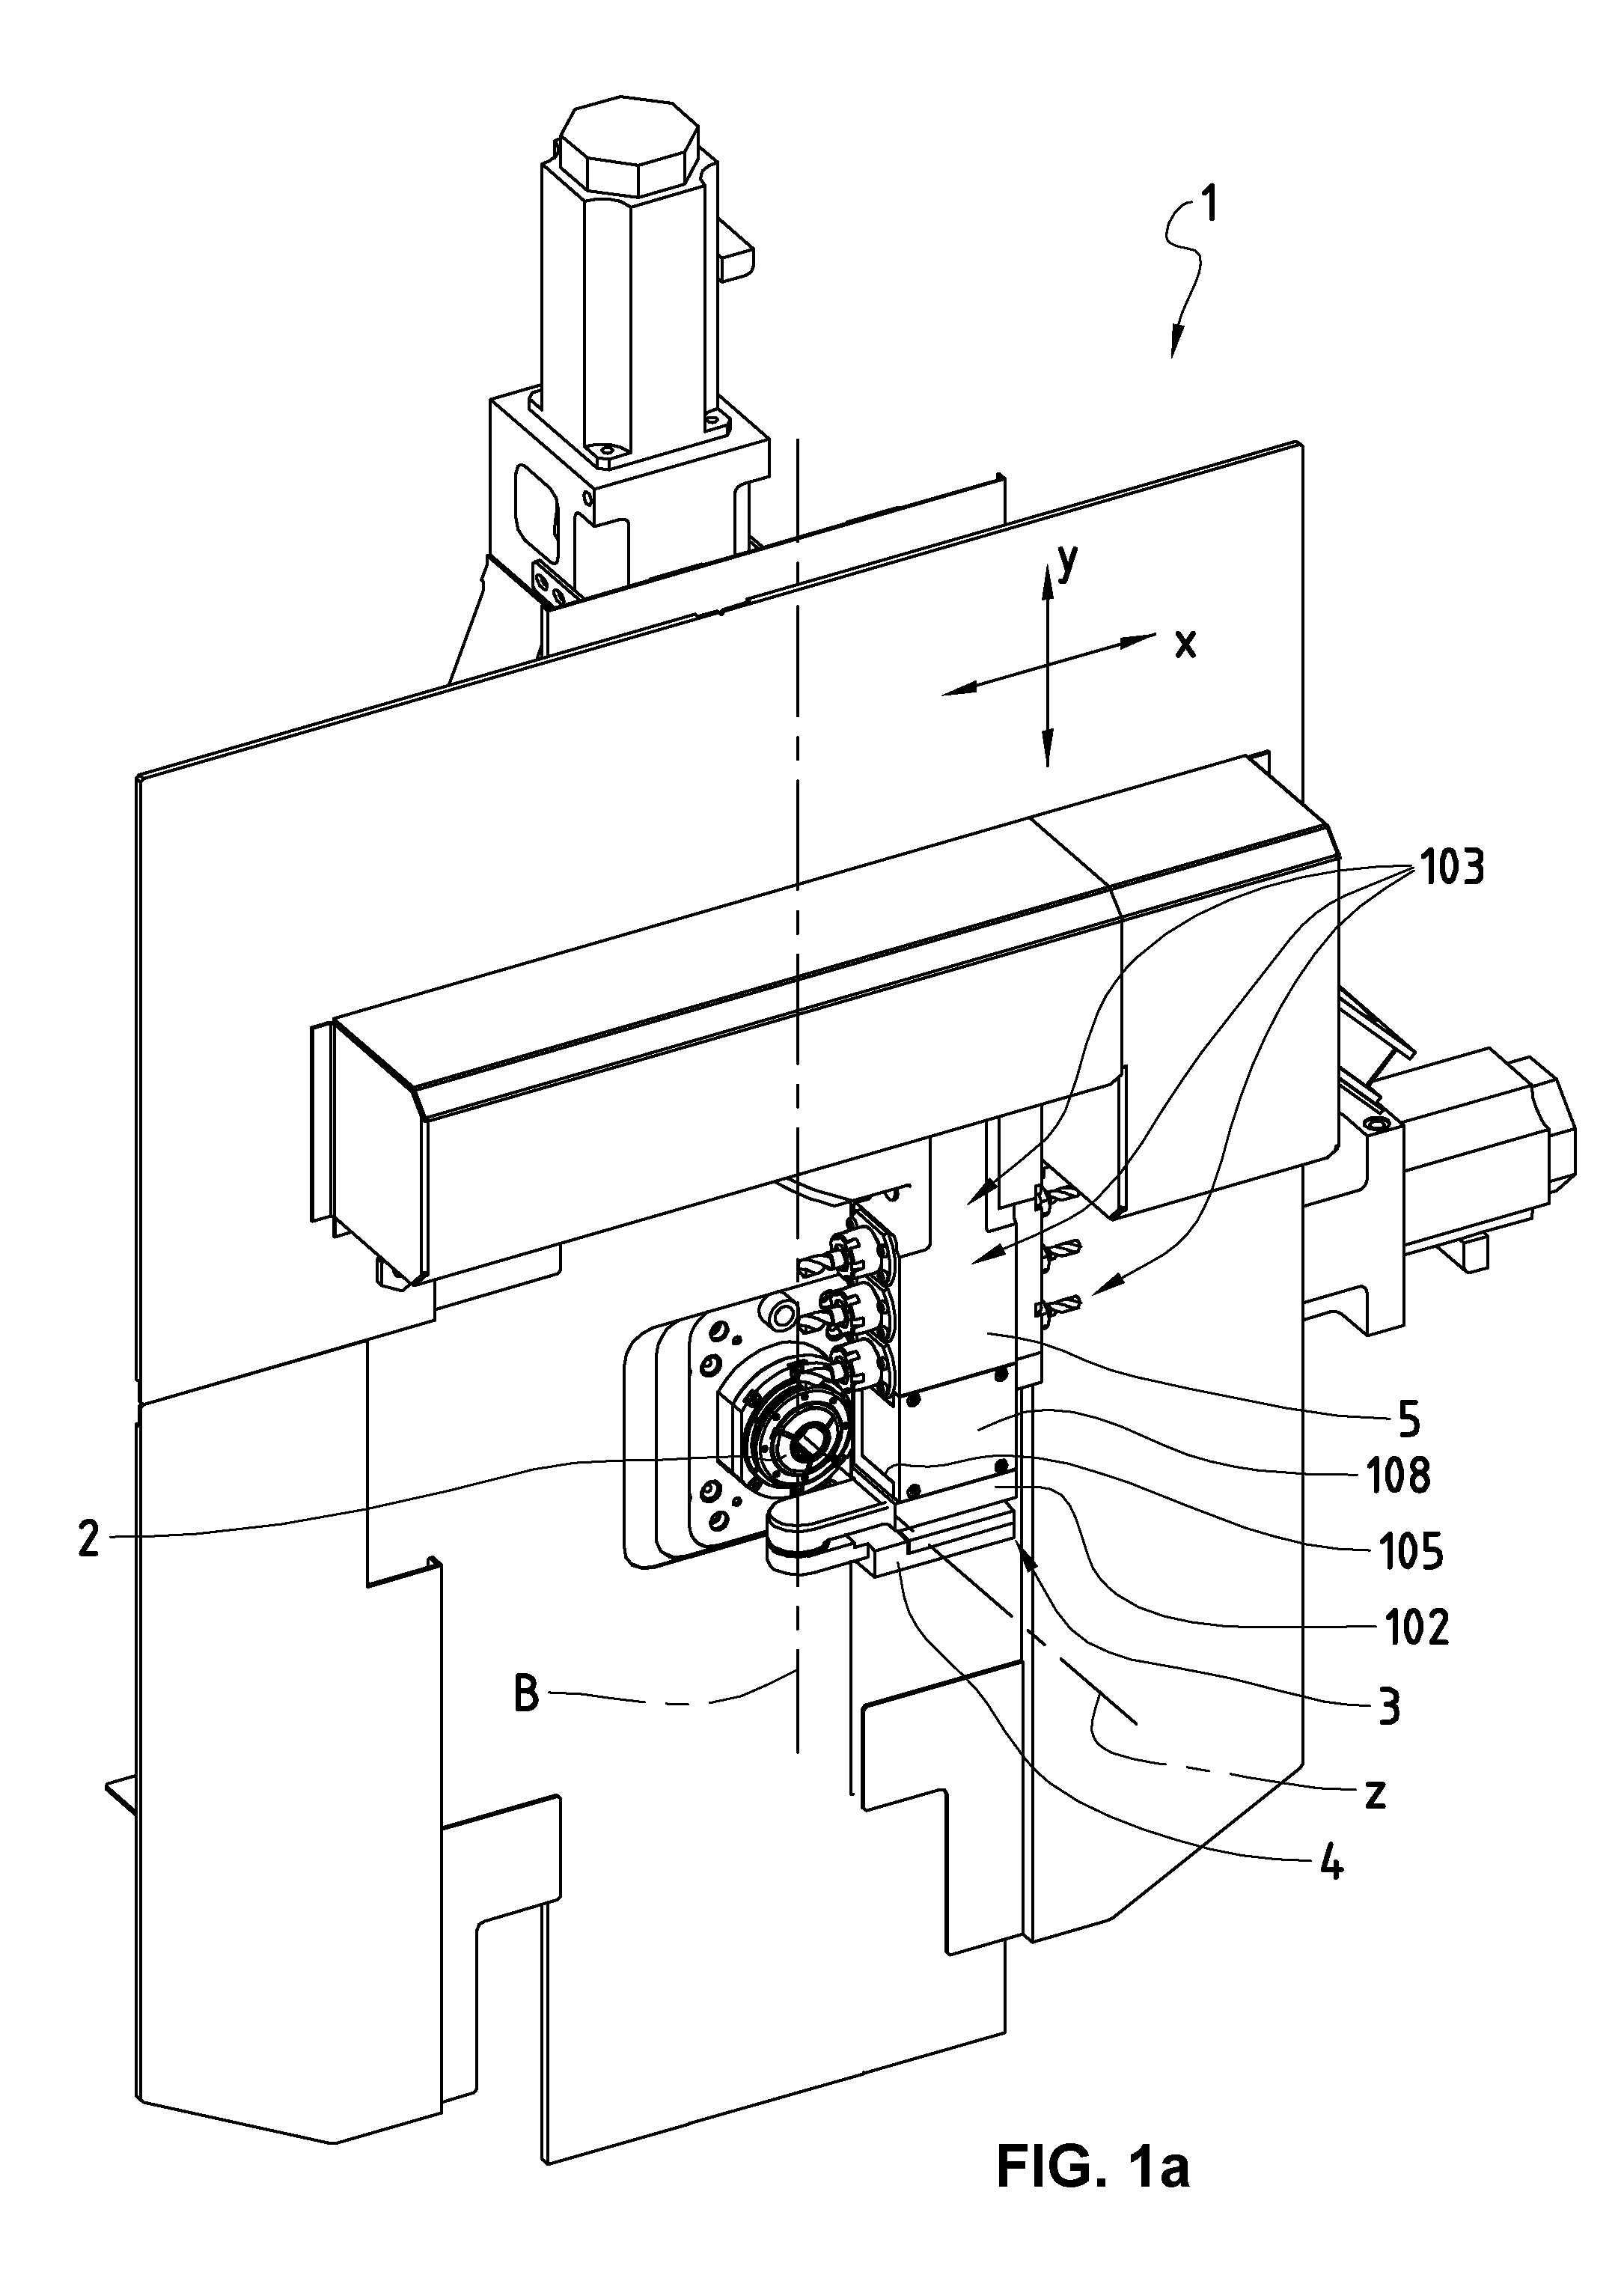 Equipment with a detachable accessory and assembly for a machining lathe, and machining lathe with digital control